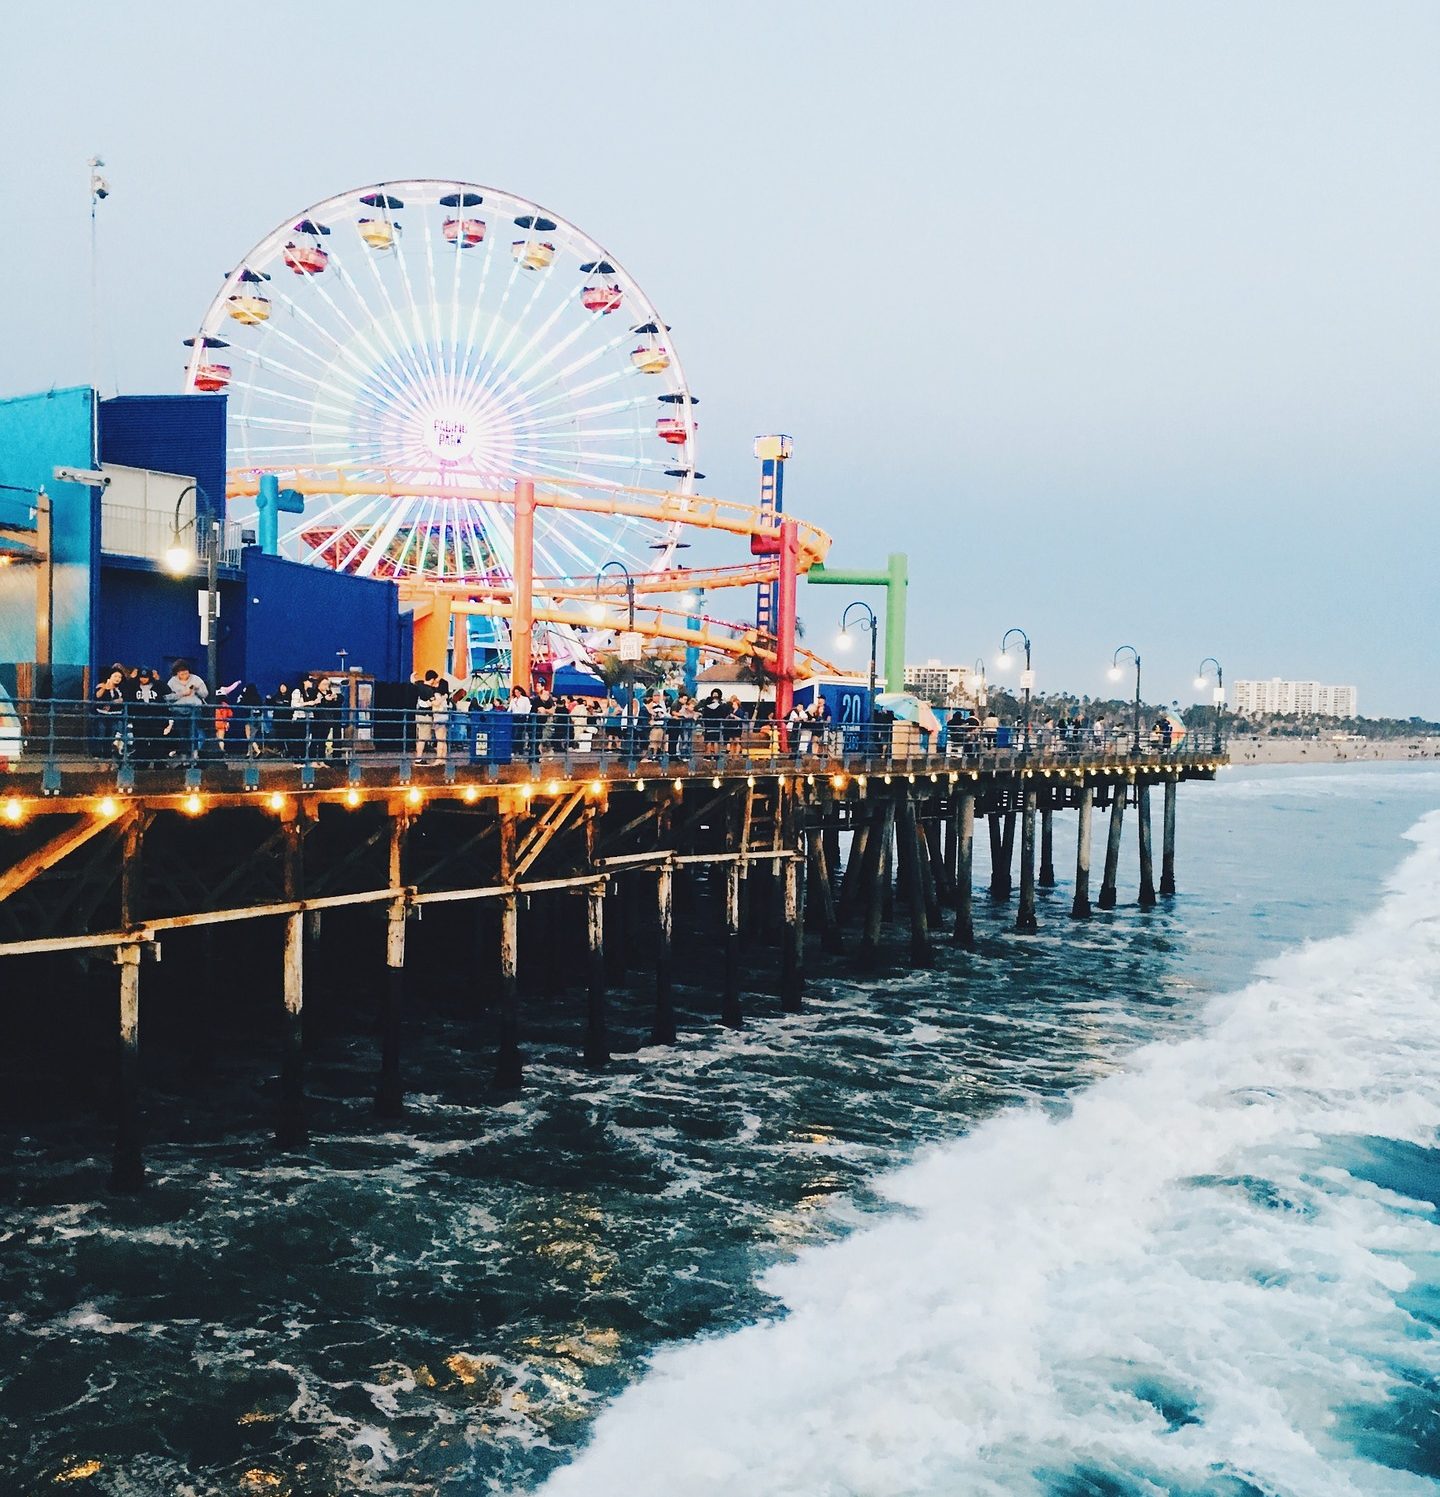 Carnival with Ferris wheel at Santa Monica's famous pier